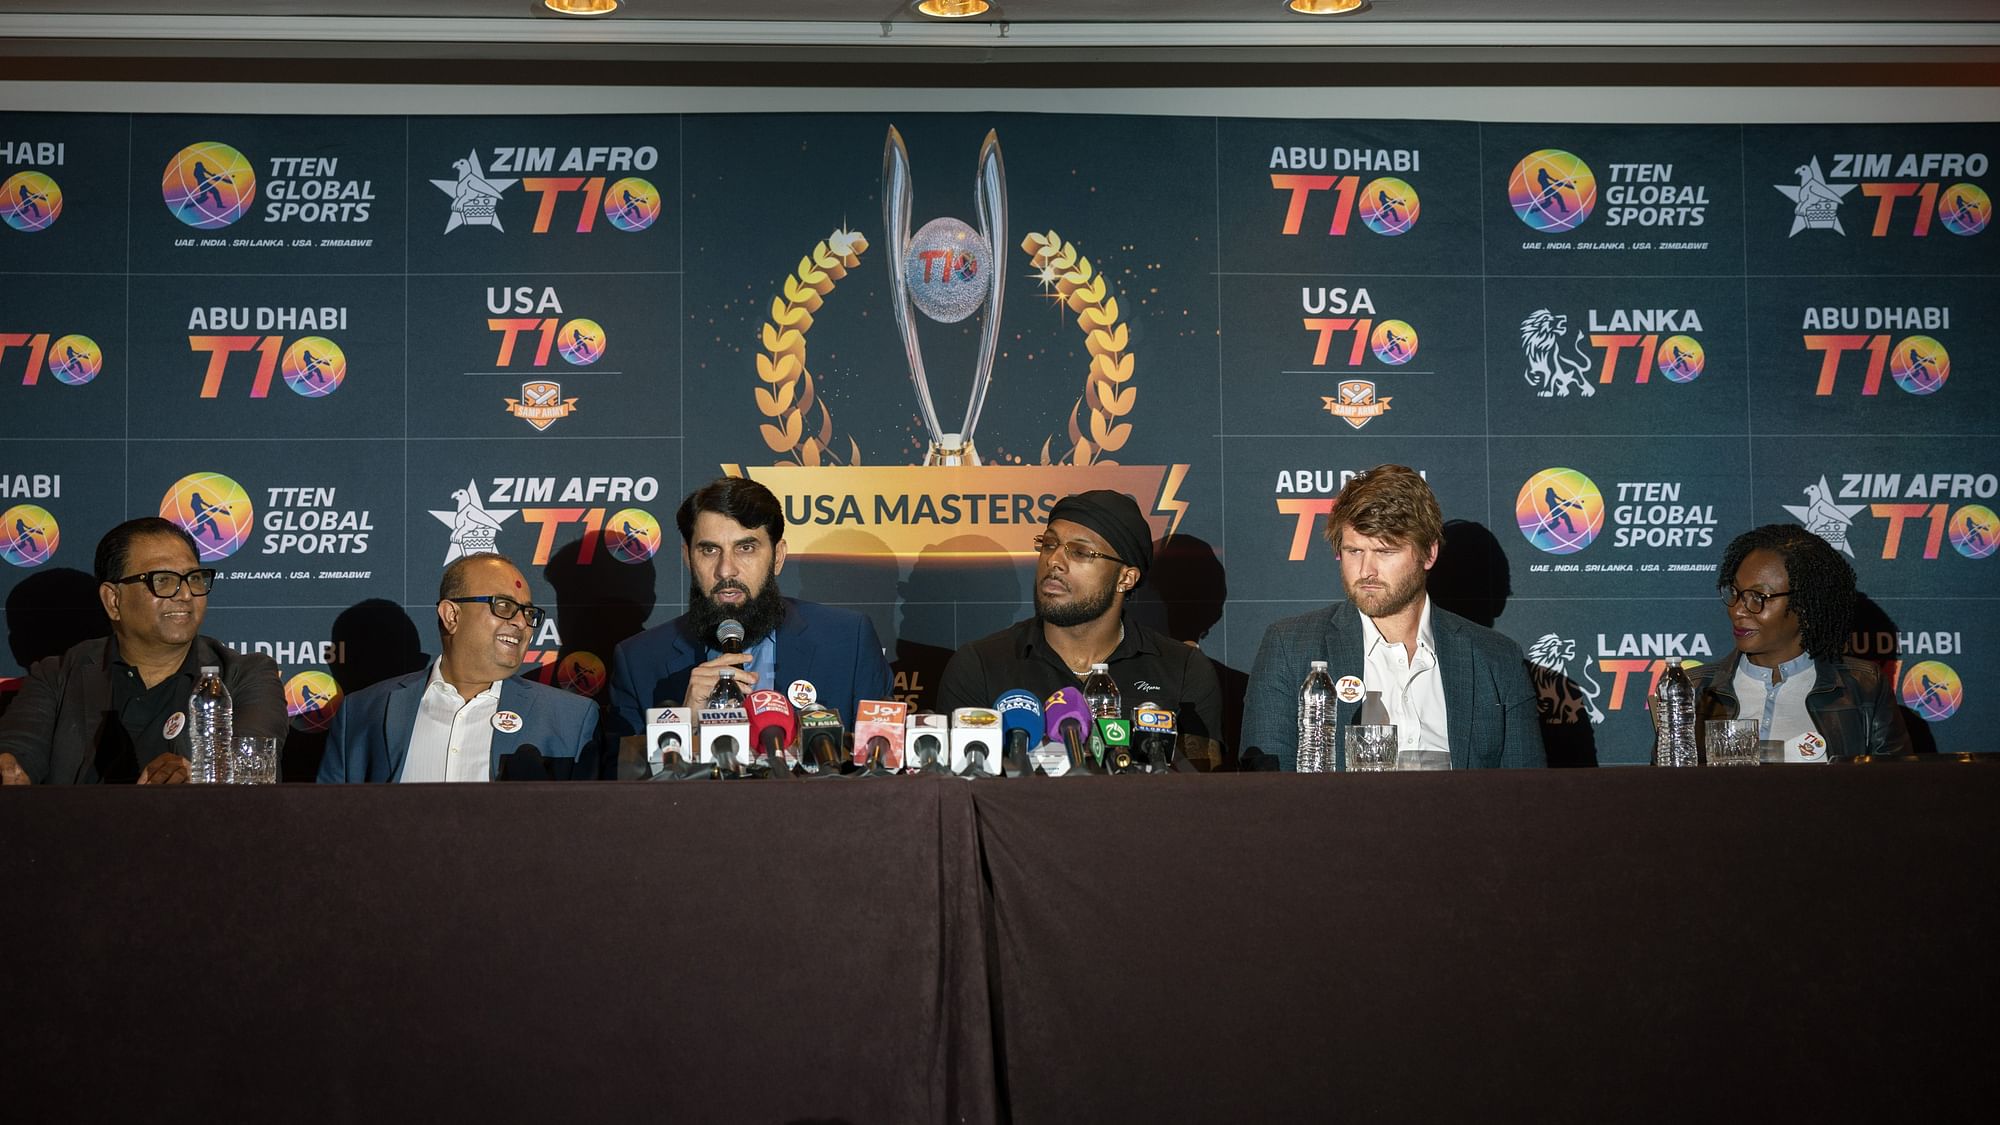 US Masters T10 league launched in the presence of Shivanrine Chanderpaul and Misbah-ul-Haq